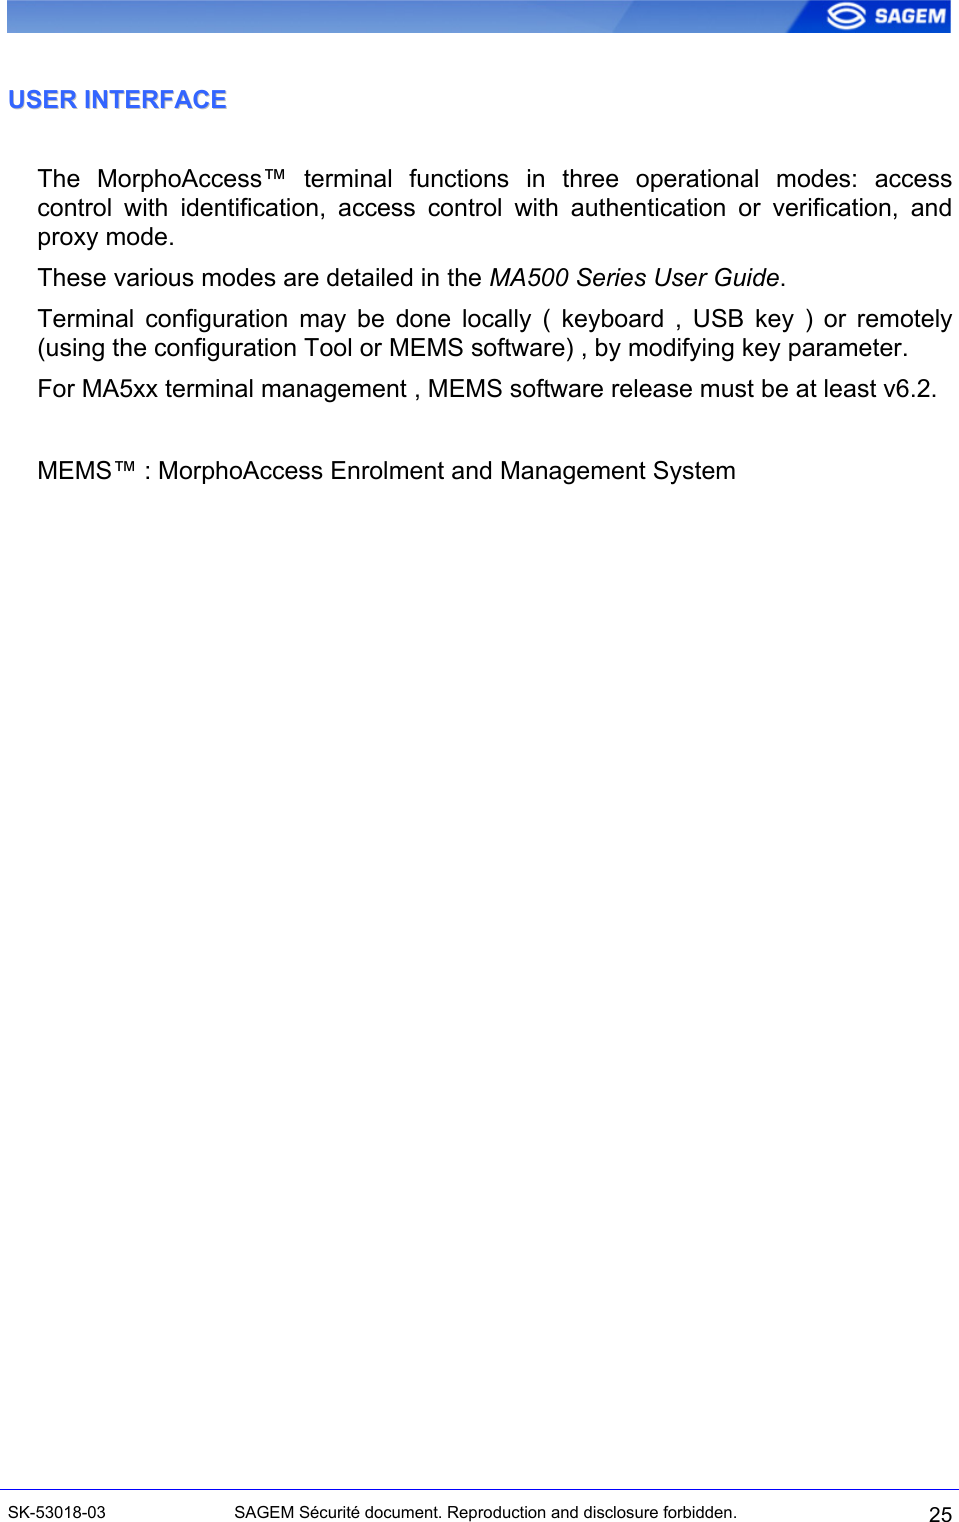  UUSSEERR  IINNTTEERRFFAACCEE  The MorphoAccess™ terminal functions in three operational modes: access control with identification, access control with authentication or verification, and proxy mode. These various modes are detailed in the MA500 Series User Guide. Terminal configuration may be done locally ( keyboard , USB key ) or remotely (using the configuration Tool or MEMS software) , by modifying key parameter. For MA5xx terminal management , MEMS software release must be at least v6.2.  MEMS™ : MorphoAccess Enrolment and Management System   SK-53018-03  SAGEM Sécurité document. Reproduction and disclosure forbidden.  25 